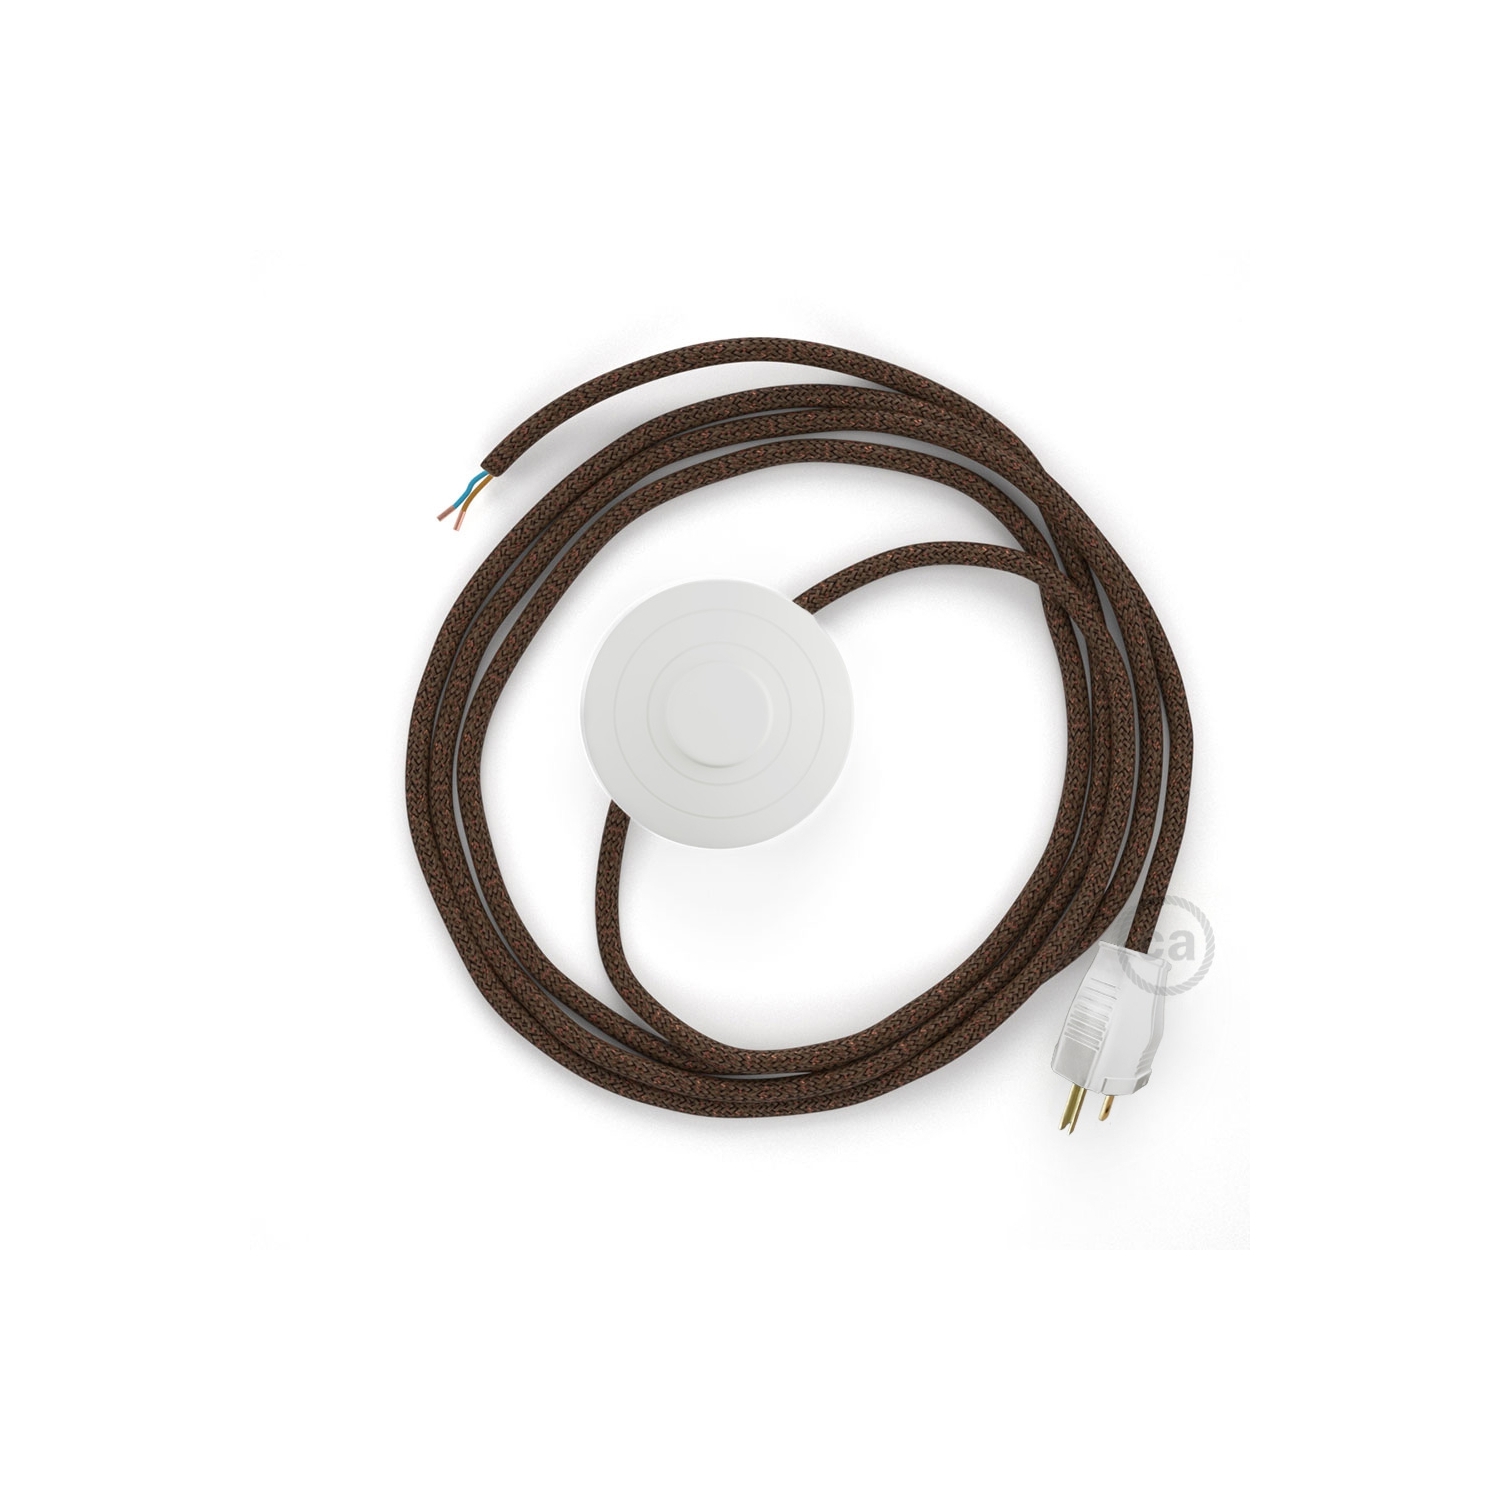 Power Cord with foot switch, RL13 Brown Glitter - Choose color of switch/plug